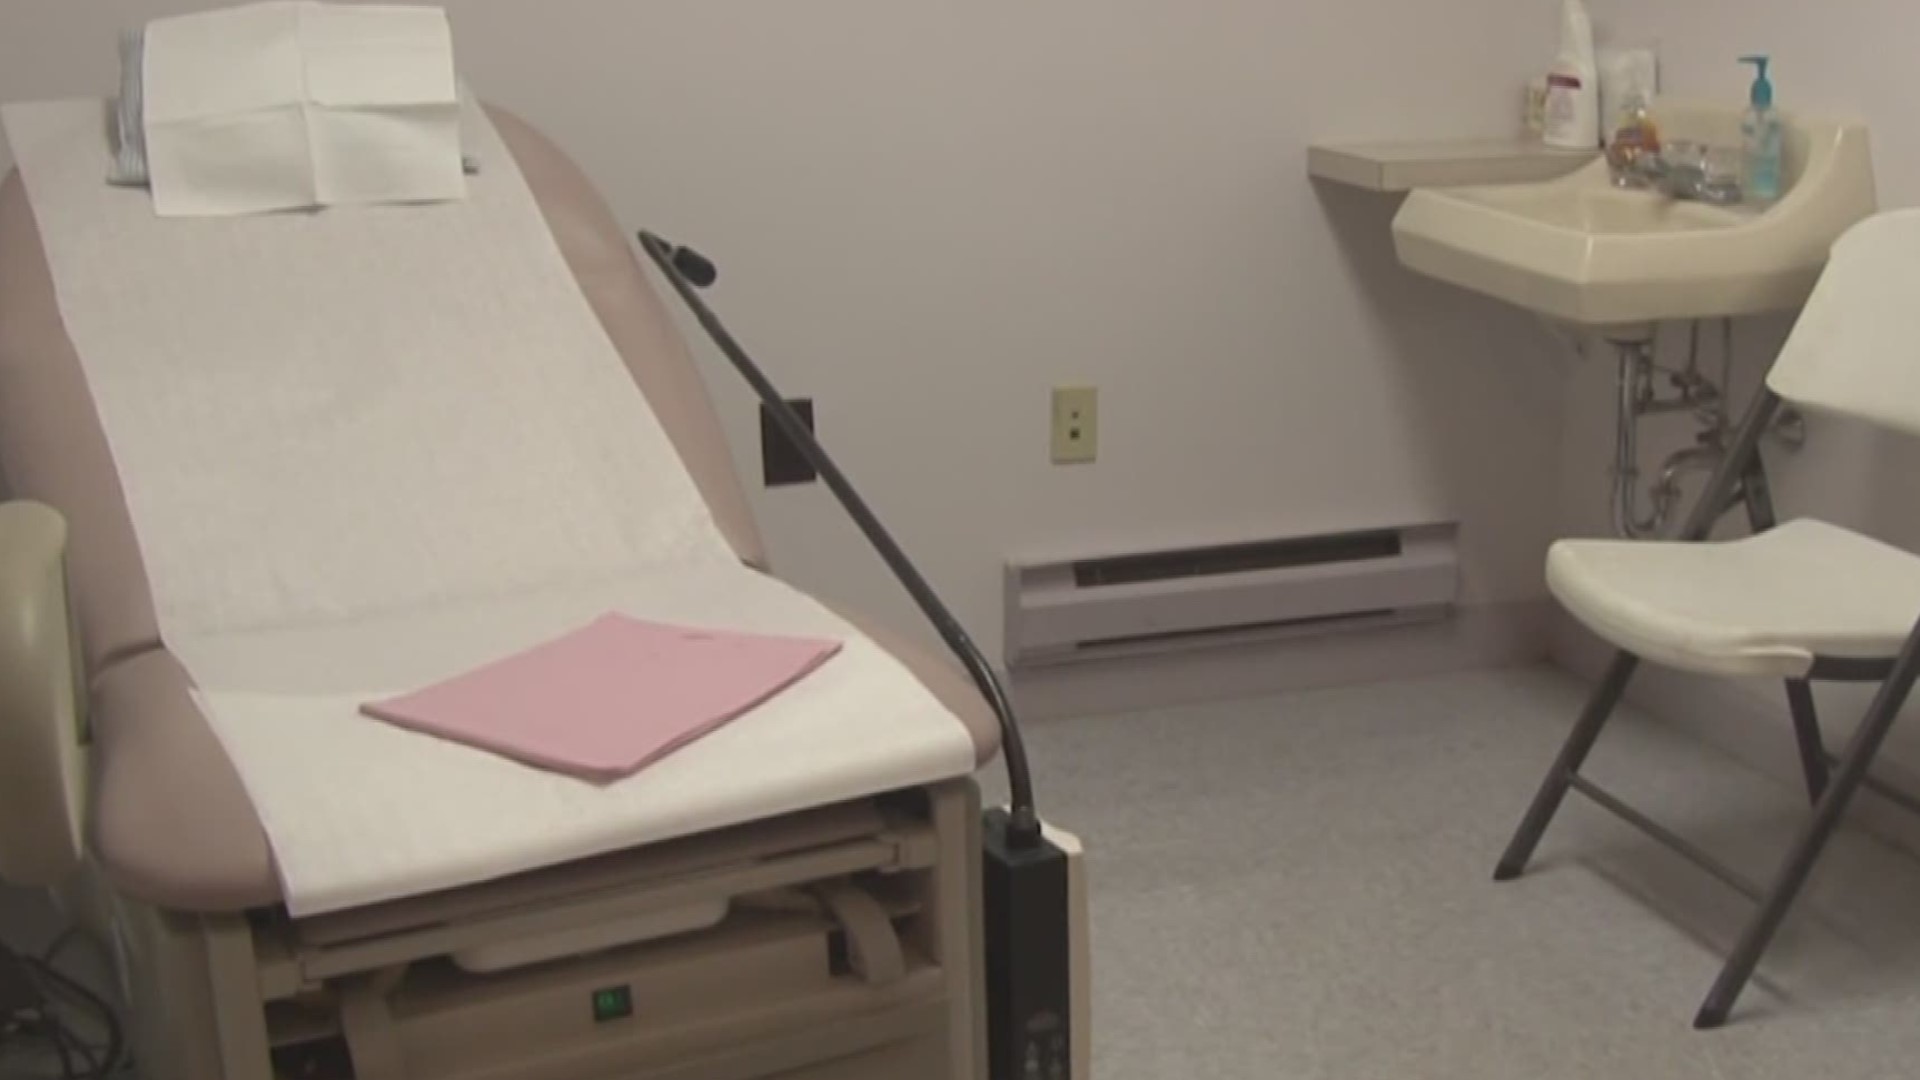 The Maine House voted Tuesday to pass a bill that would allow medical personnel other than doctors to perform abortions.